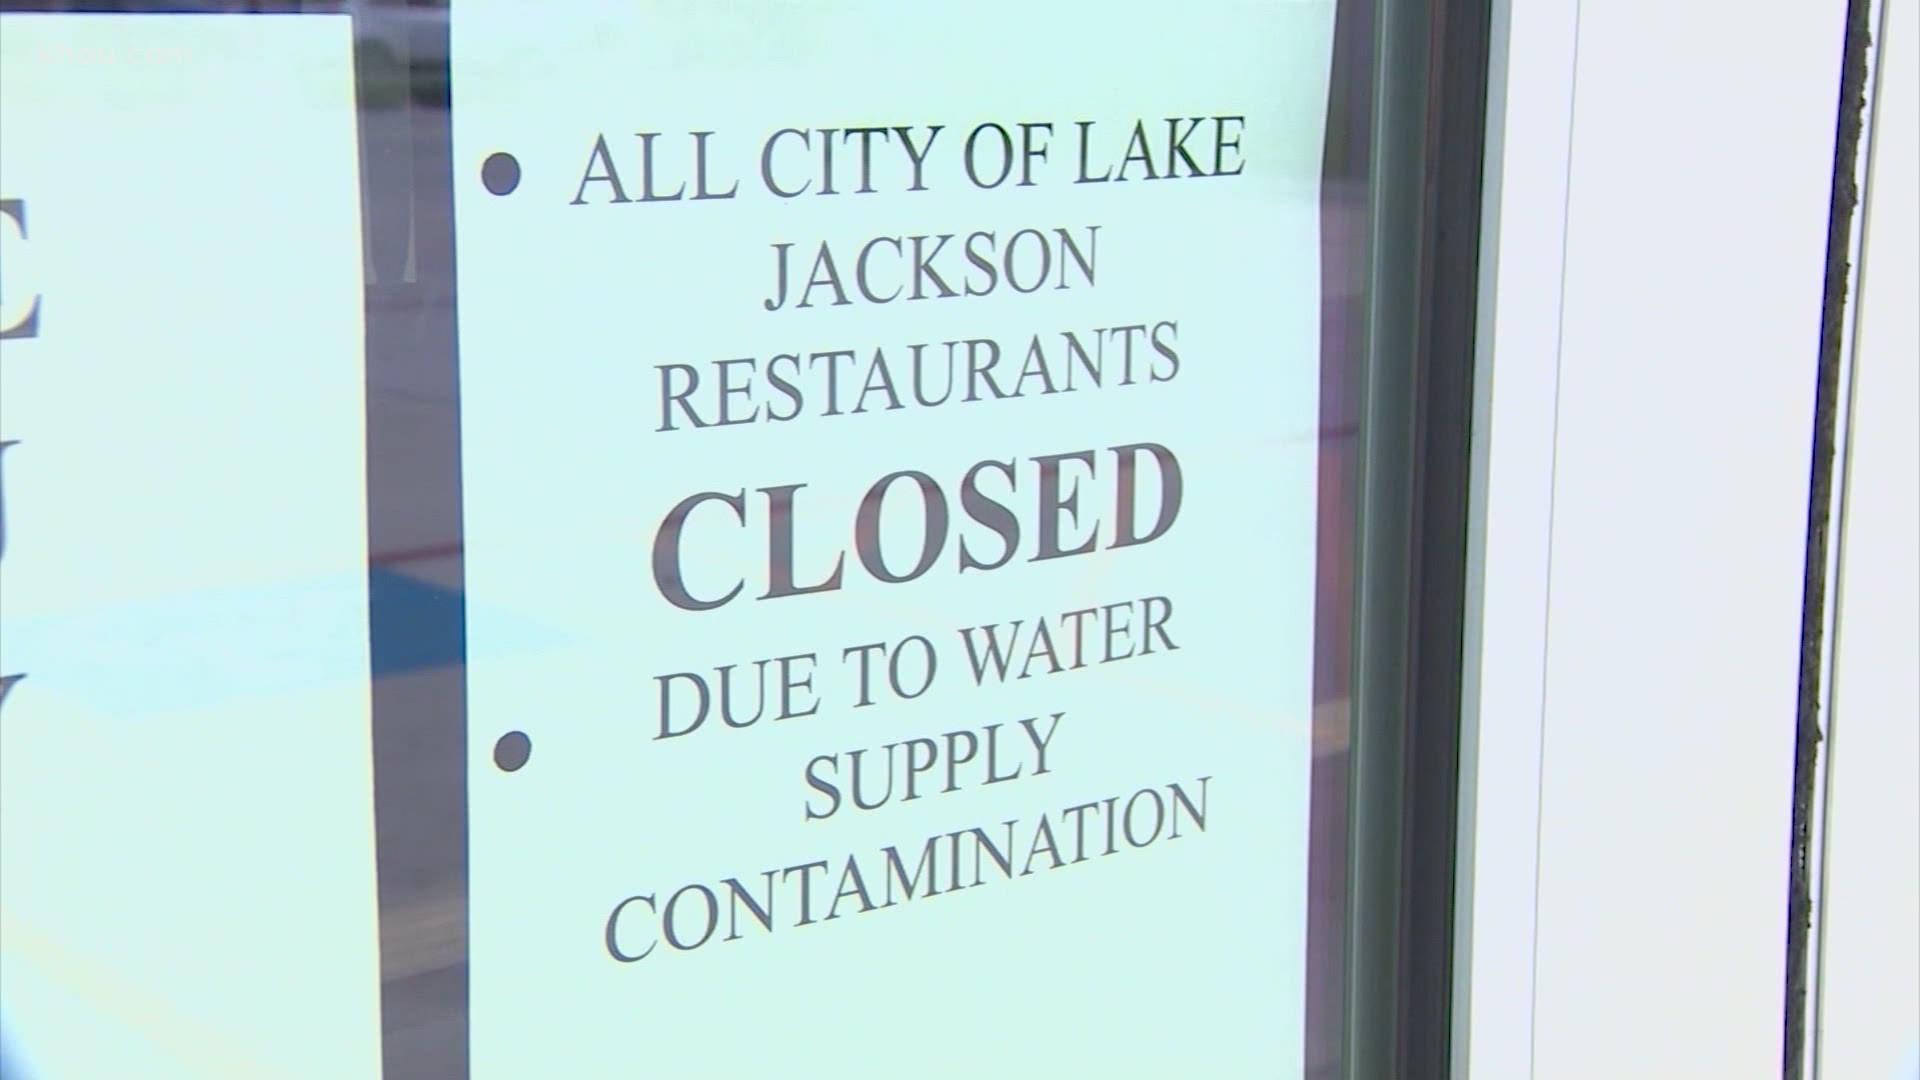 Lake Jackson is currently under a boil water notice as state and local officials work to flush and disinfect the city's water supply.